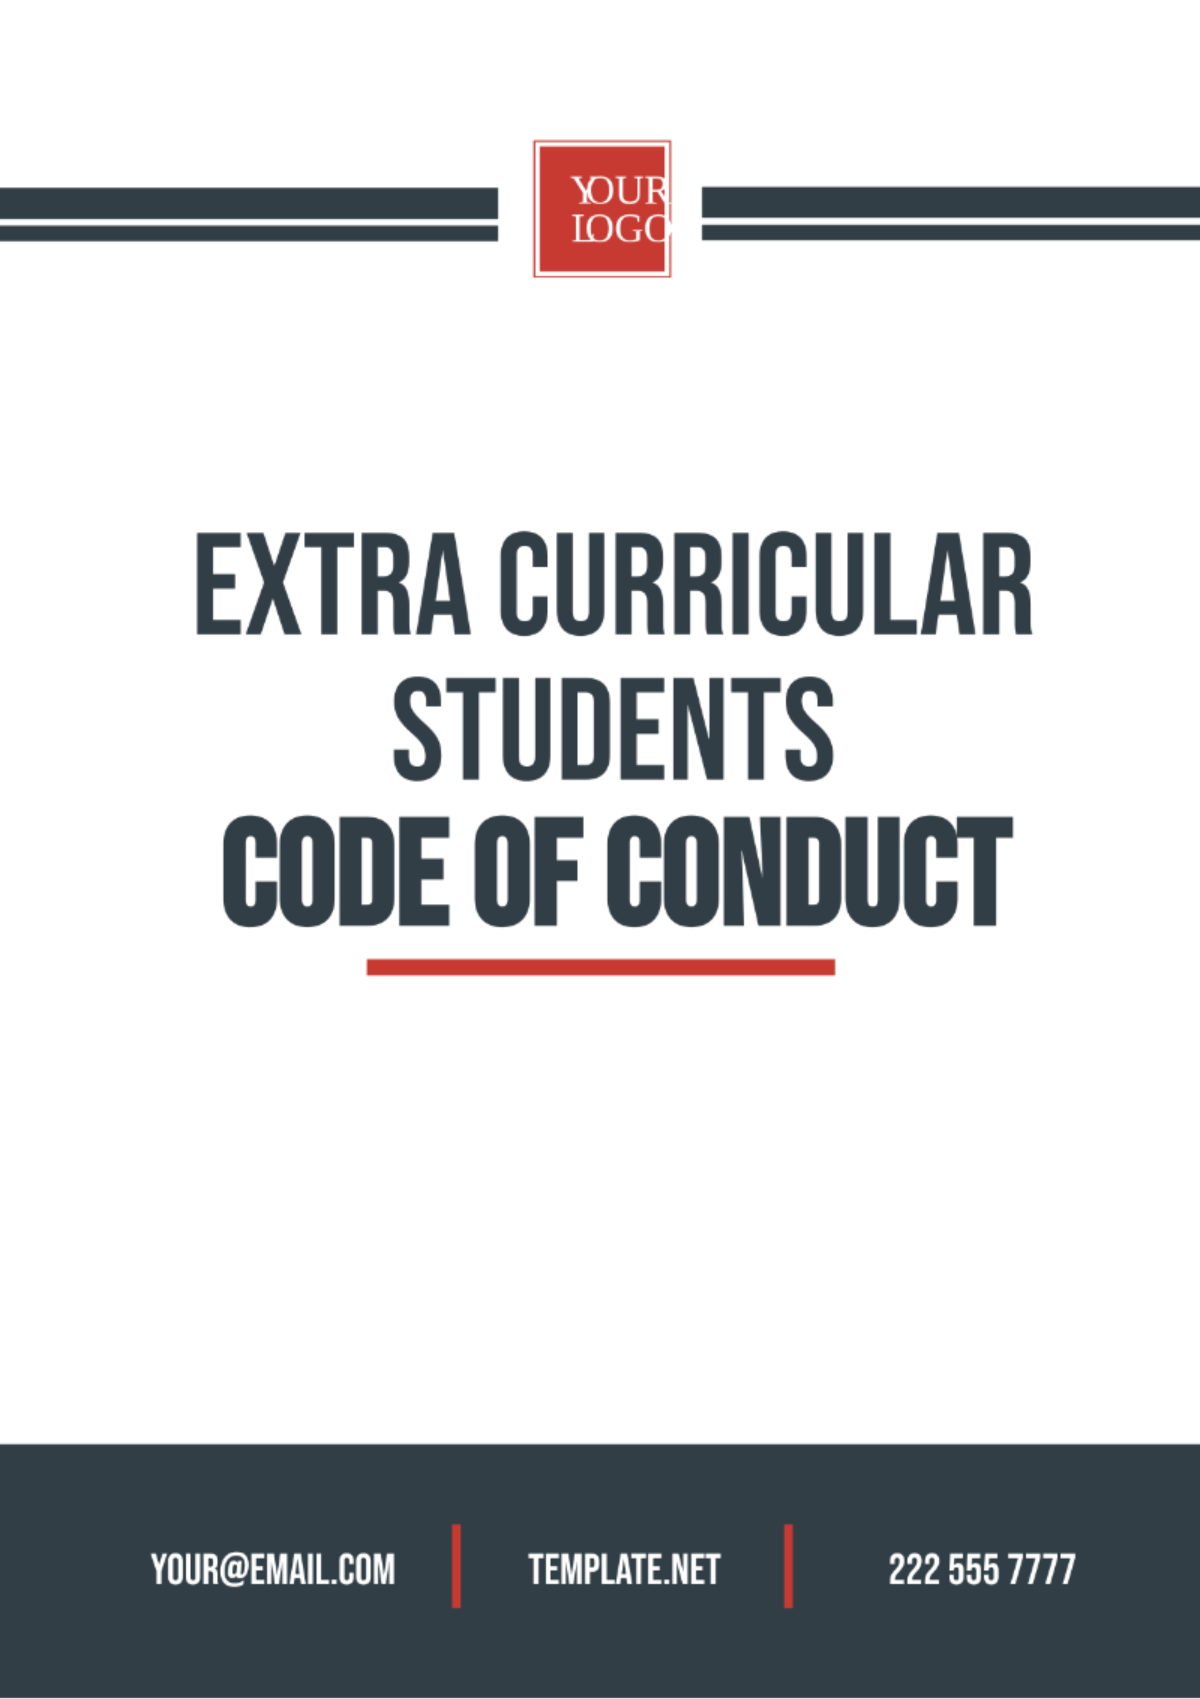 Free Extra Curricular Student Code of Conduct Template